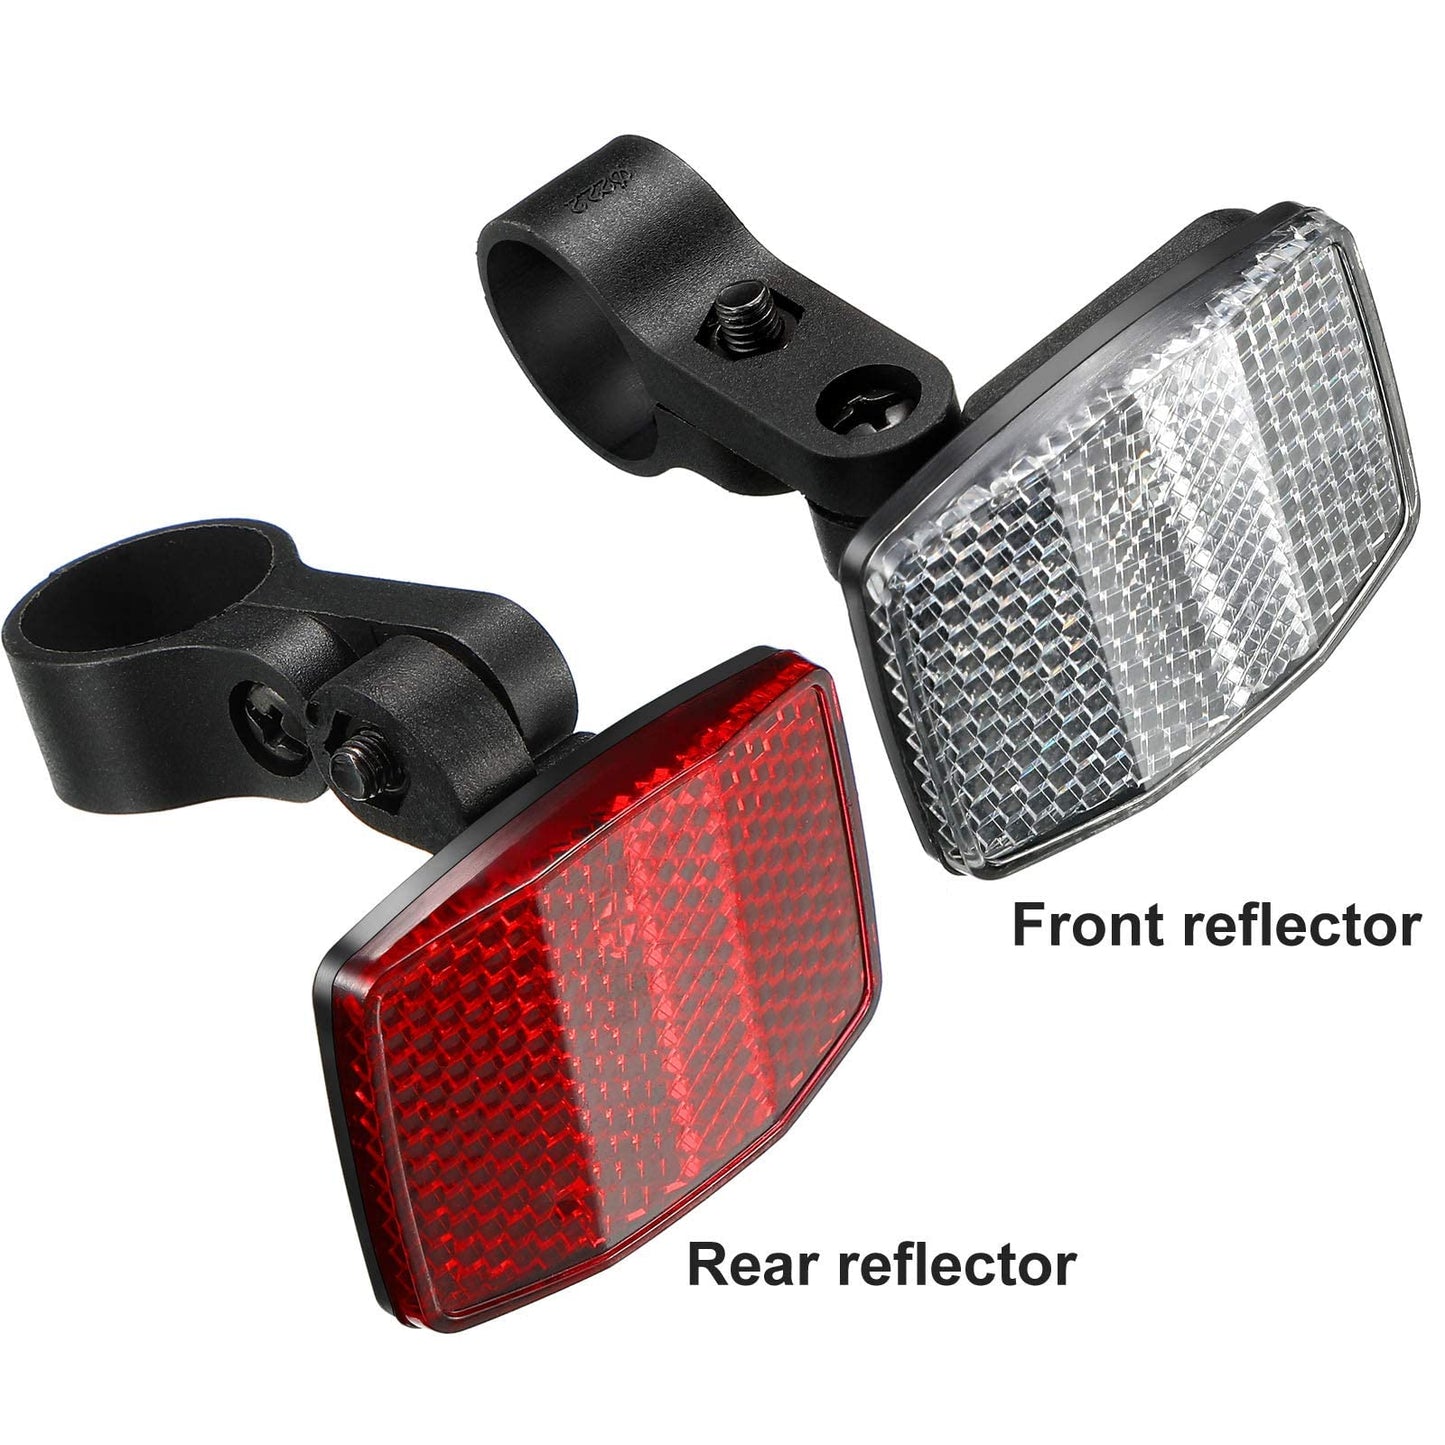 4Pcs Bicycle Reflectors, Front and Rear Safety Warning Reflectors, Plastic Warning Tail Light Kit for Bicycle Mountain Bike Night Driving (2 Red 2 White)